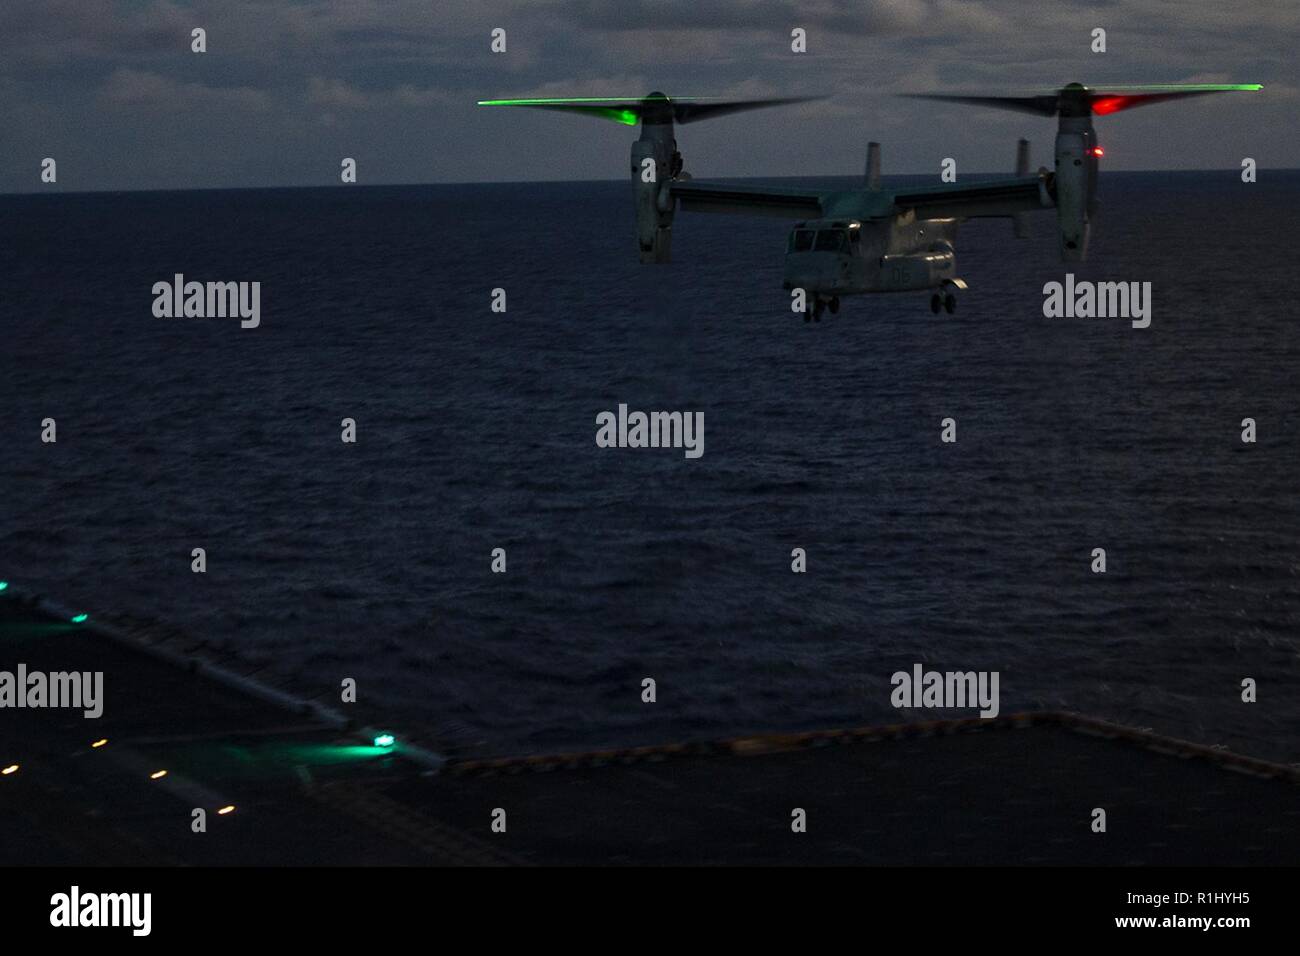 An MV-22B Osprey tiltrotor aircraft prepares to land aboard the amphibious assault ship USS Wasp (LHD 1) during night takeoff and landing training, underway in the East China Sea, Sept. 23, 2018. The Osprey belongs to Marine Medium Tiltrotor Squadron 262 (Reinforced), the Aviation Combat Element for the 31st Marine Expeditionary Unit. Marine naval aviators with VMM-262 (Rein.) perform a wide variety of aviation missions for the 31st MEU, including troop transport, heavy and medium lift, fixed-wing attack support and aerial reconnaissance. The 31st MEU, the Marine Corps’ only continuously forwa Stock Photo